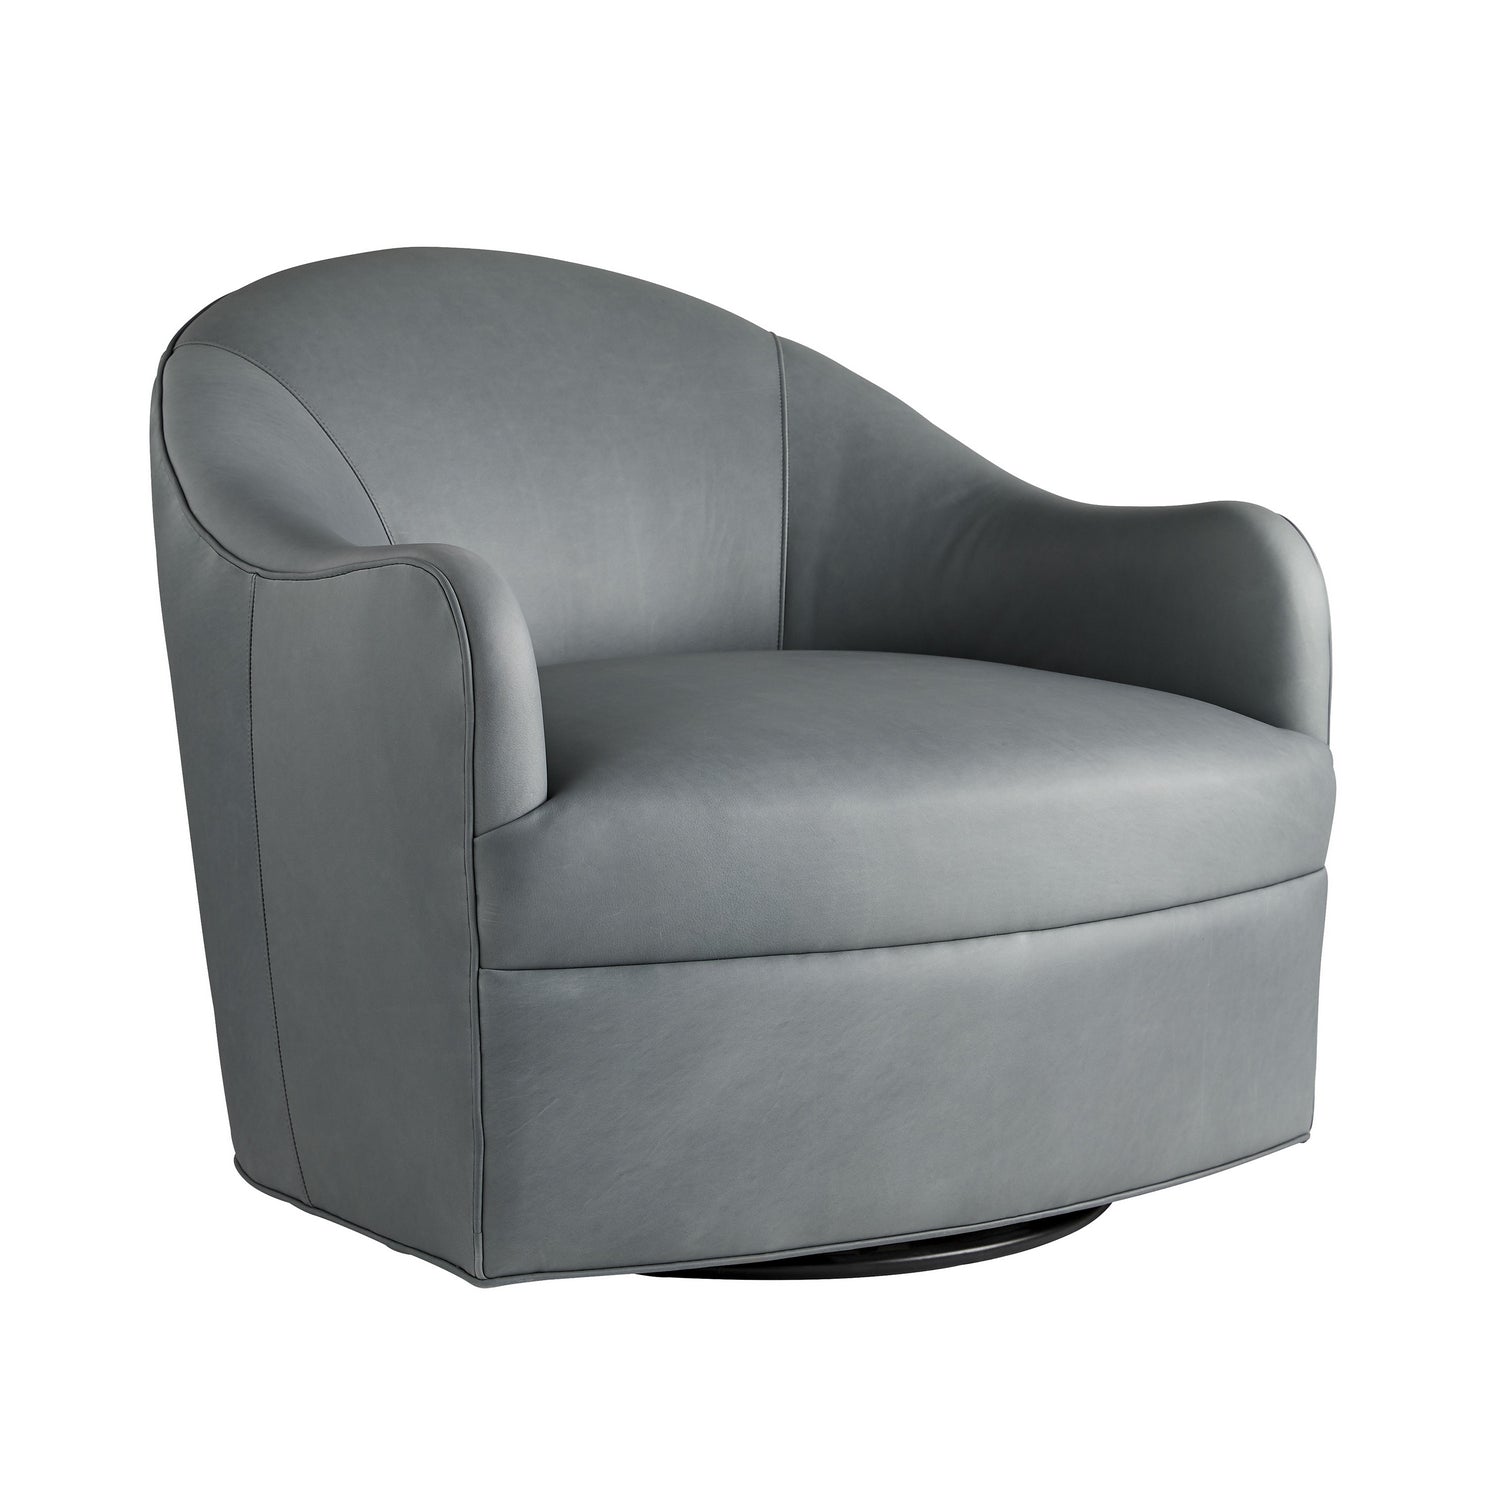 Chair with Swivel from the Delfino collection in Anchor Grey finish